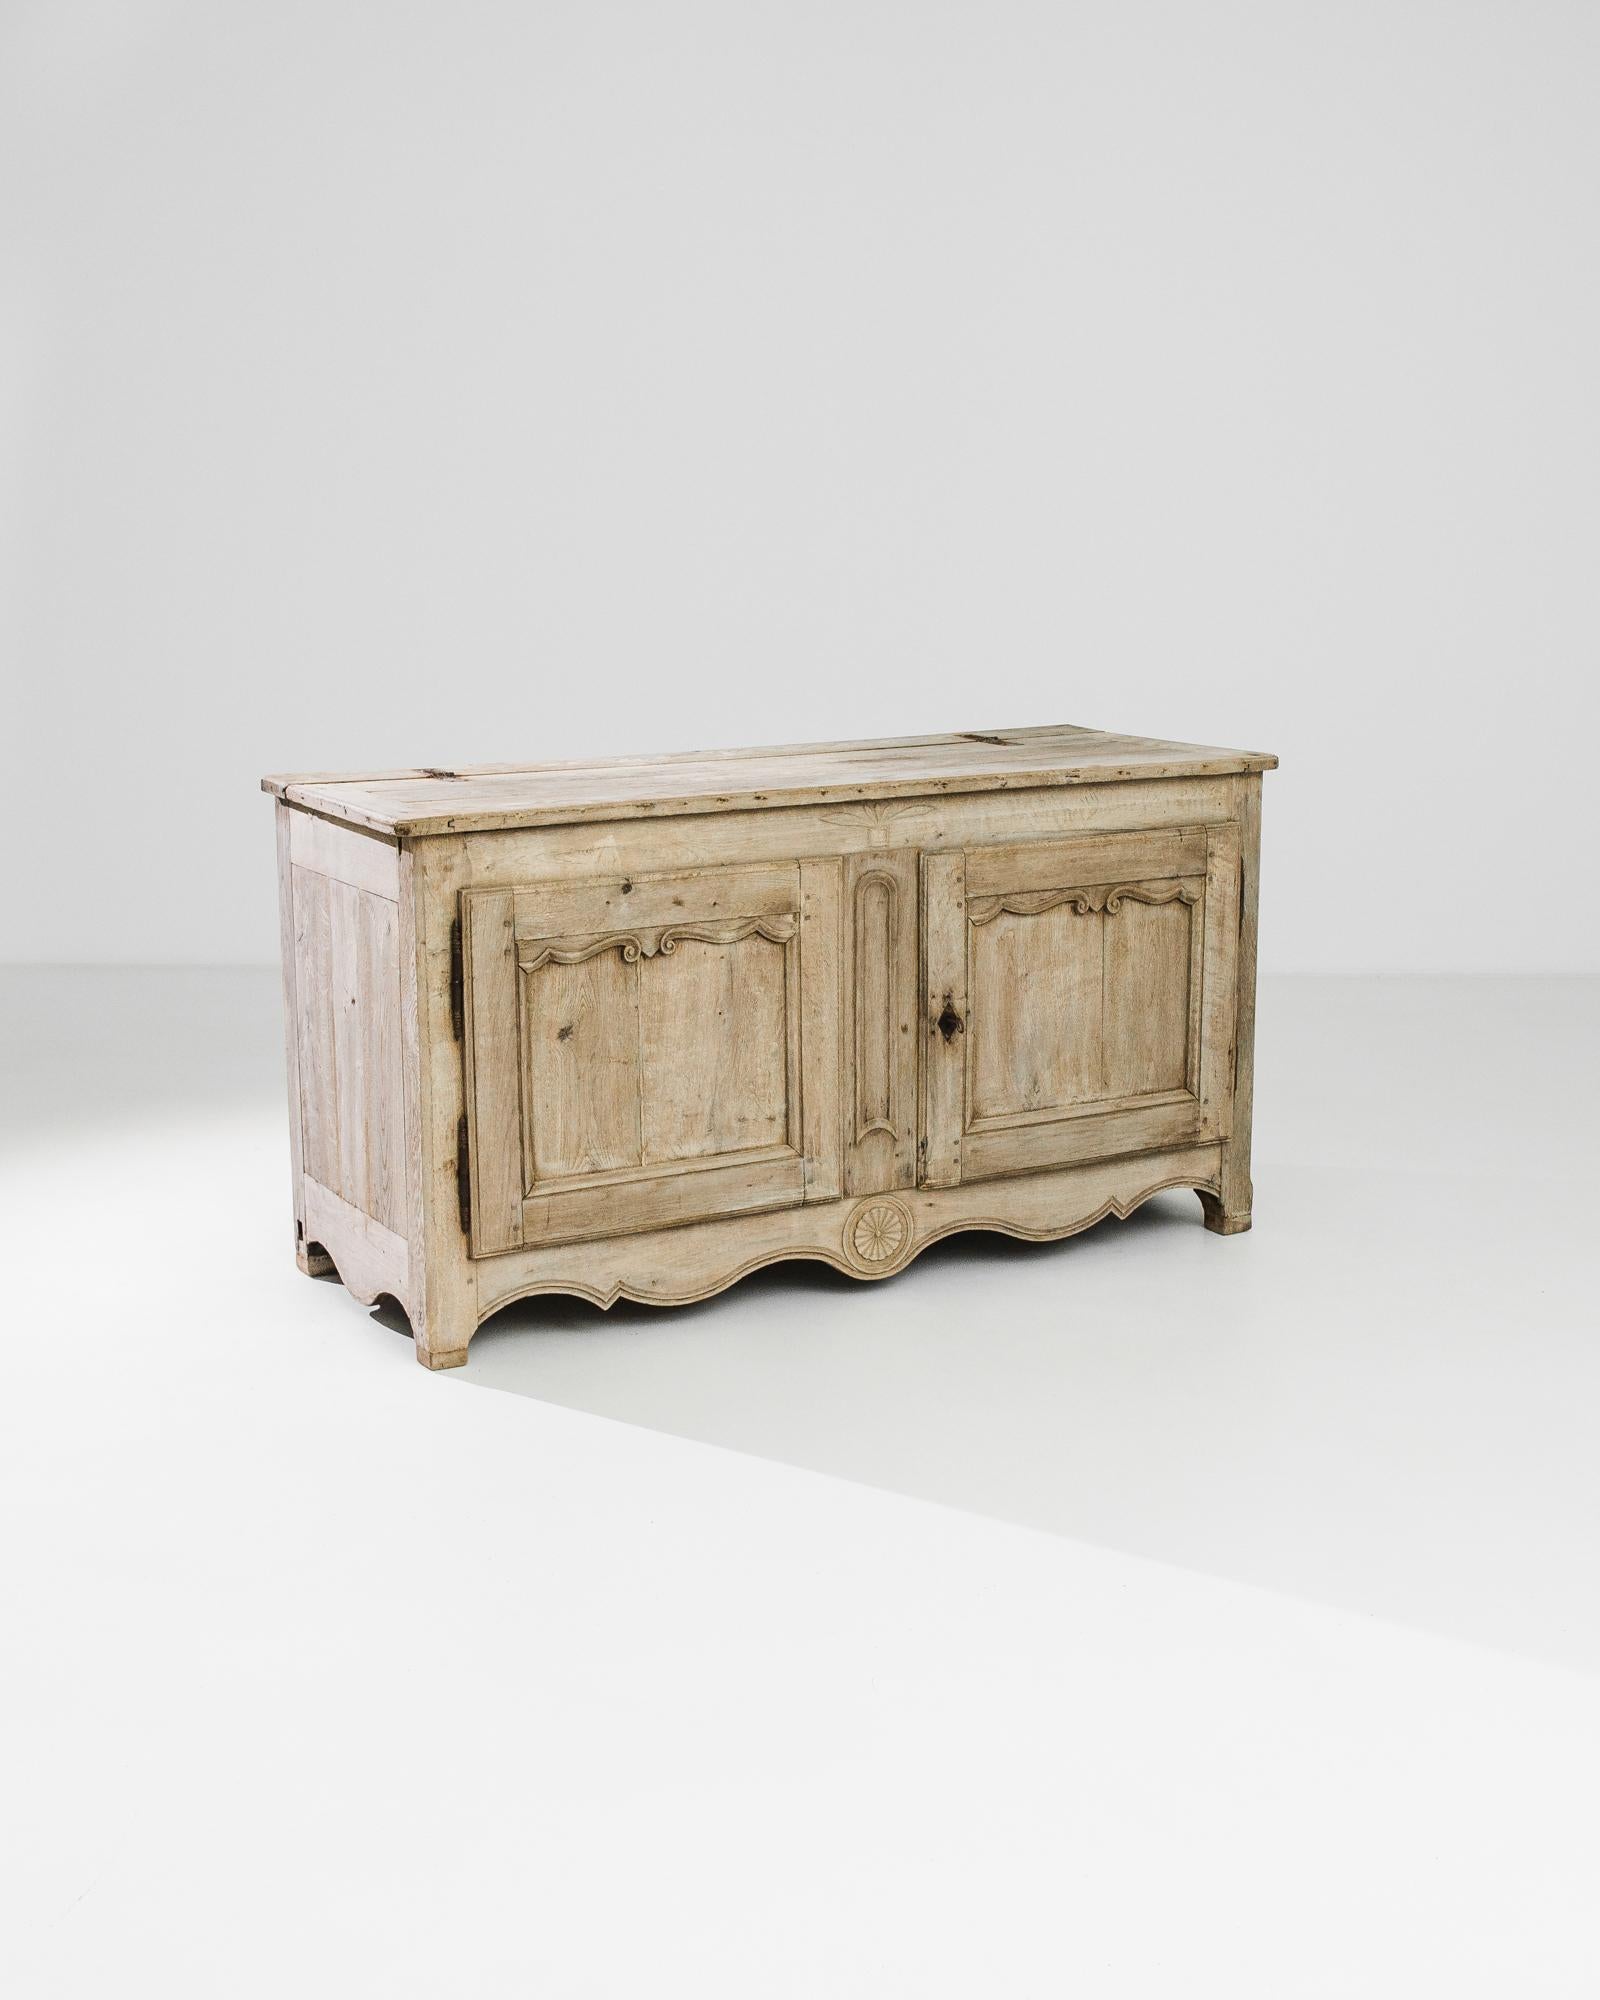 A bleached oak buffet from France, produced circa 1820. With a fine facade fairly etched, this unique buffet features a double door cabinet of two shelves, and swing-top lid. Moonlighting as a top-accessible wooden trunk means this multifaceted